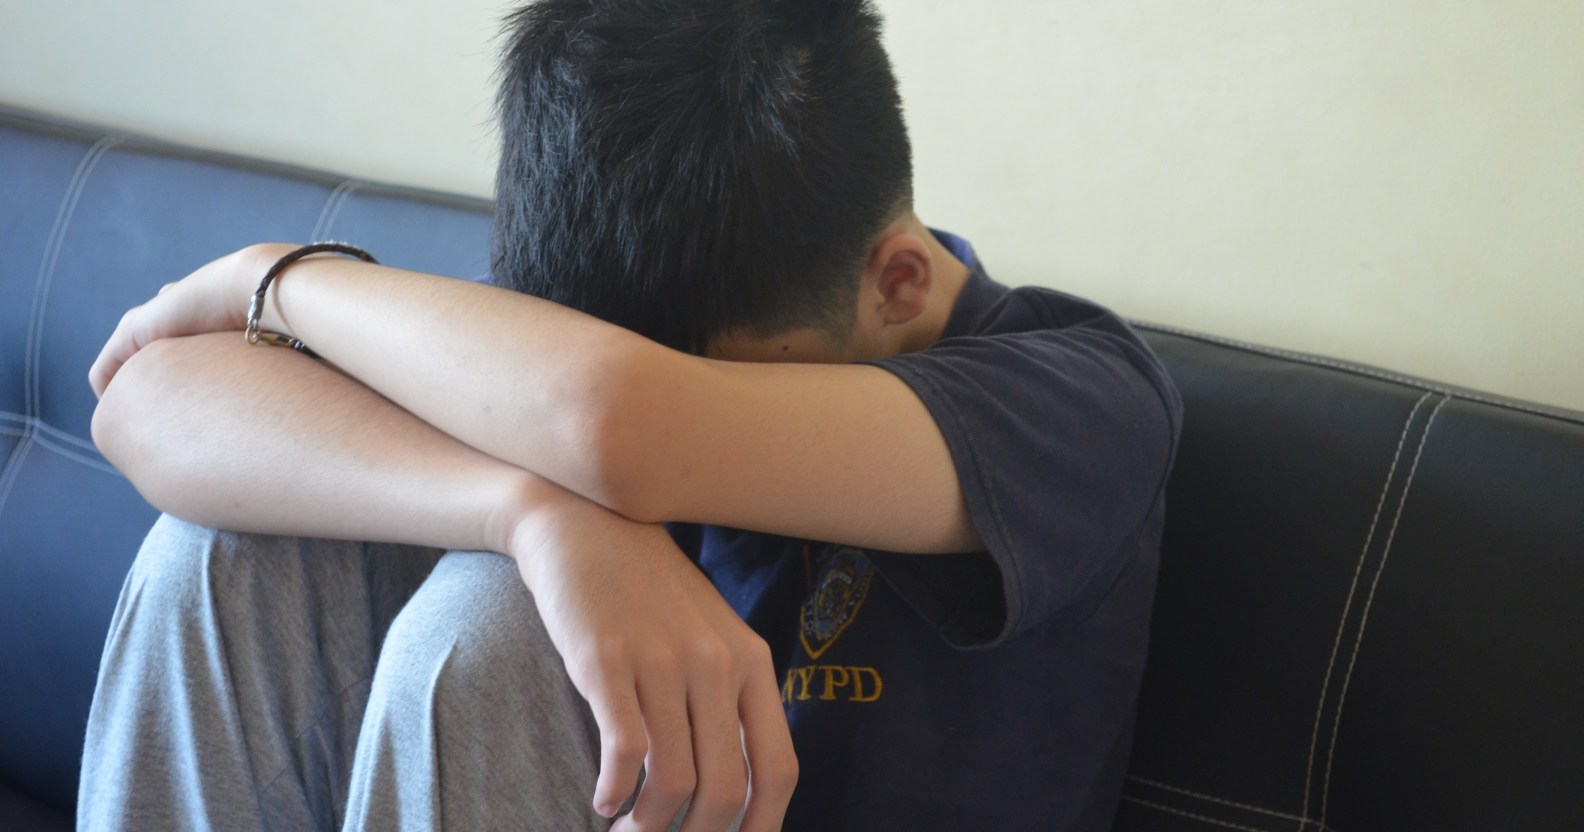 Skul Wali Ka Rep Sexx - 13-year-old boy sexually abused 'by 21 men' on Grindr | PinkNews